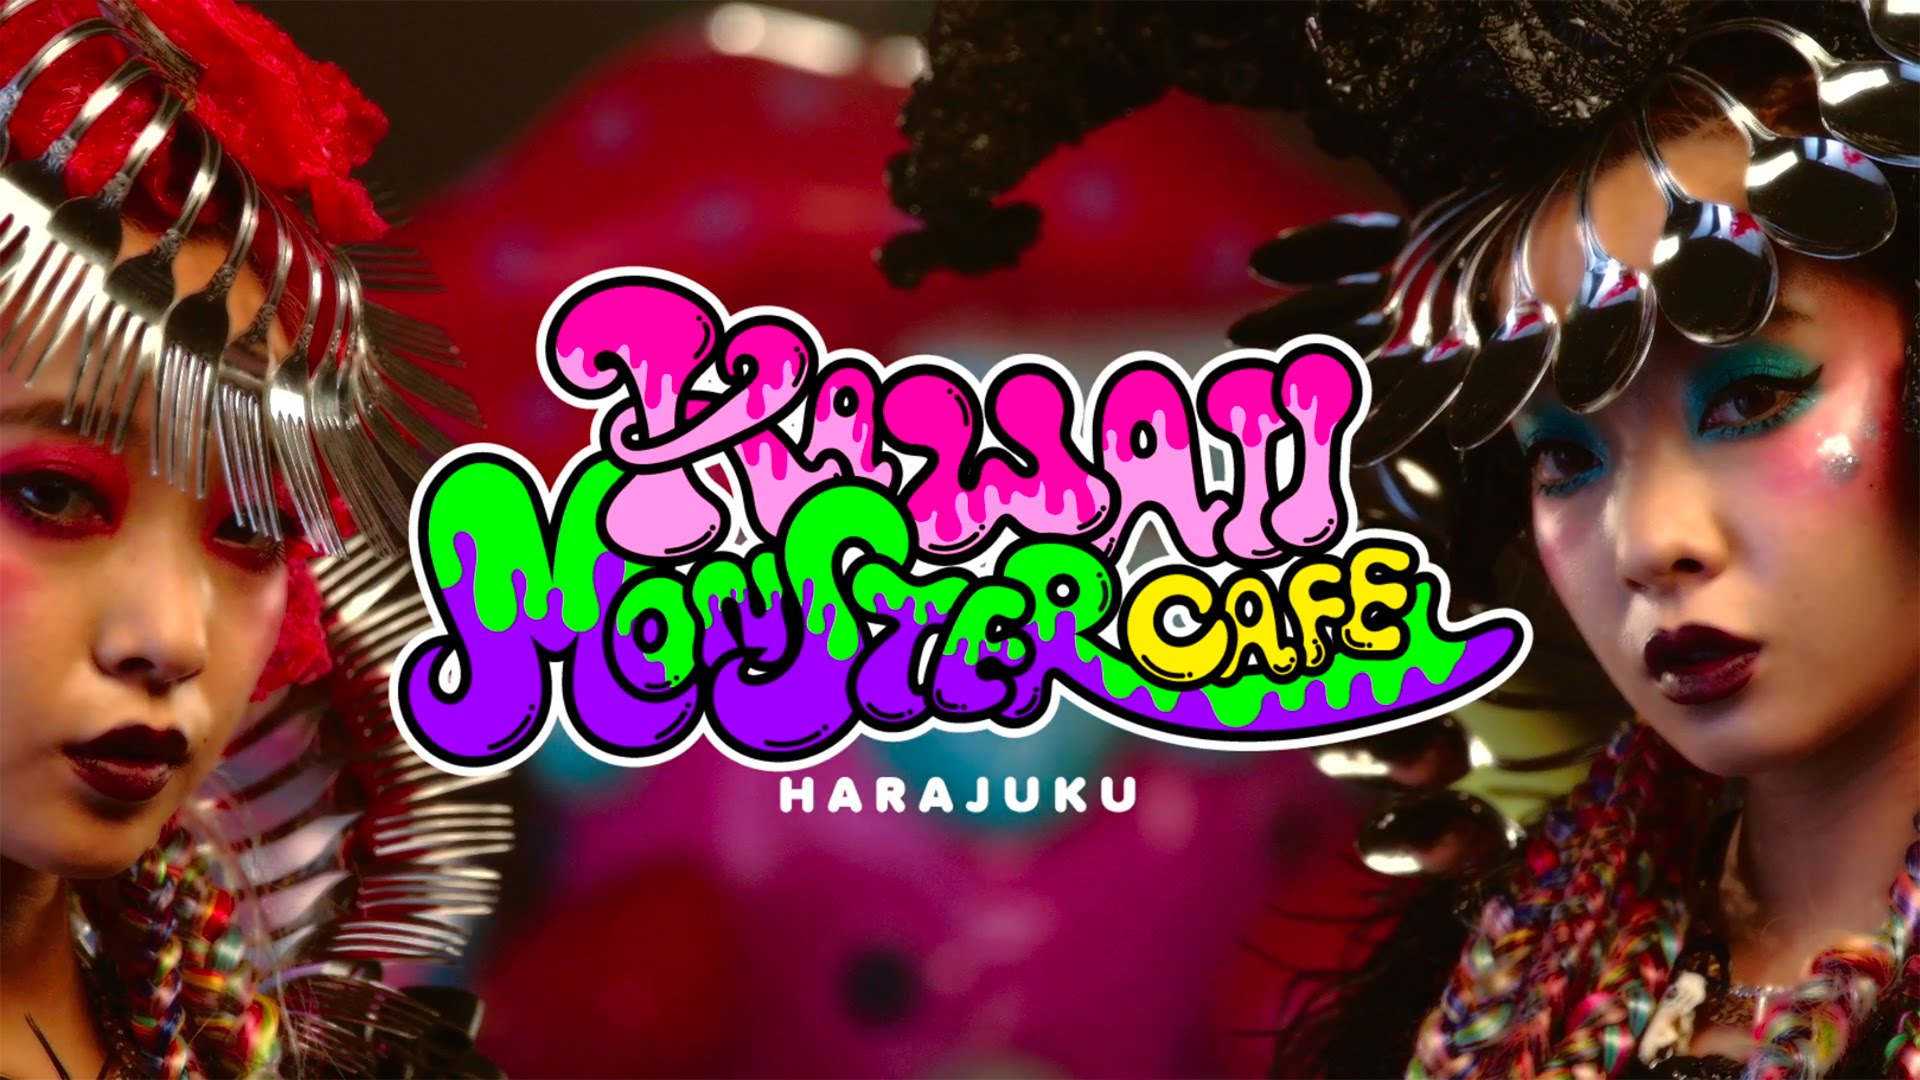 KAWAII MONSTER CAFE’s Promotion Video Revealed : You Can See New Kawaii and New Tokyo!